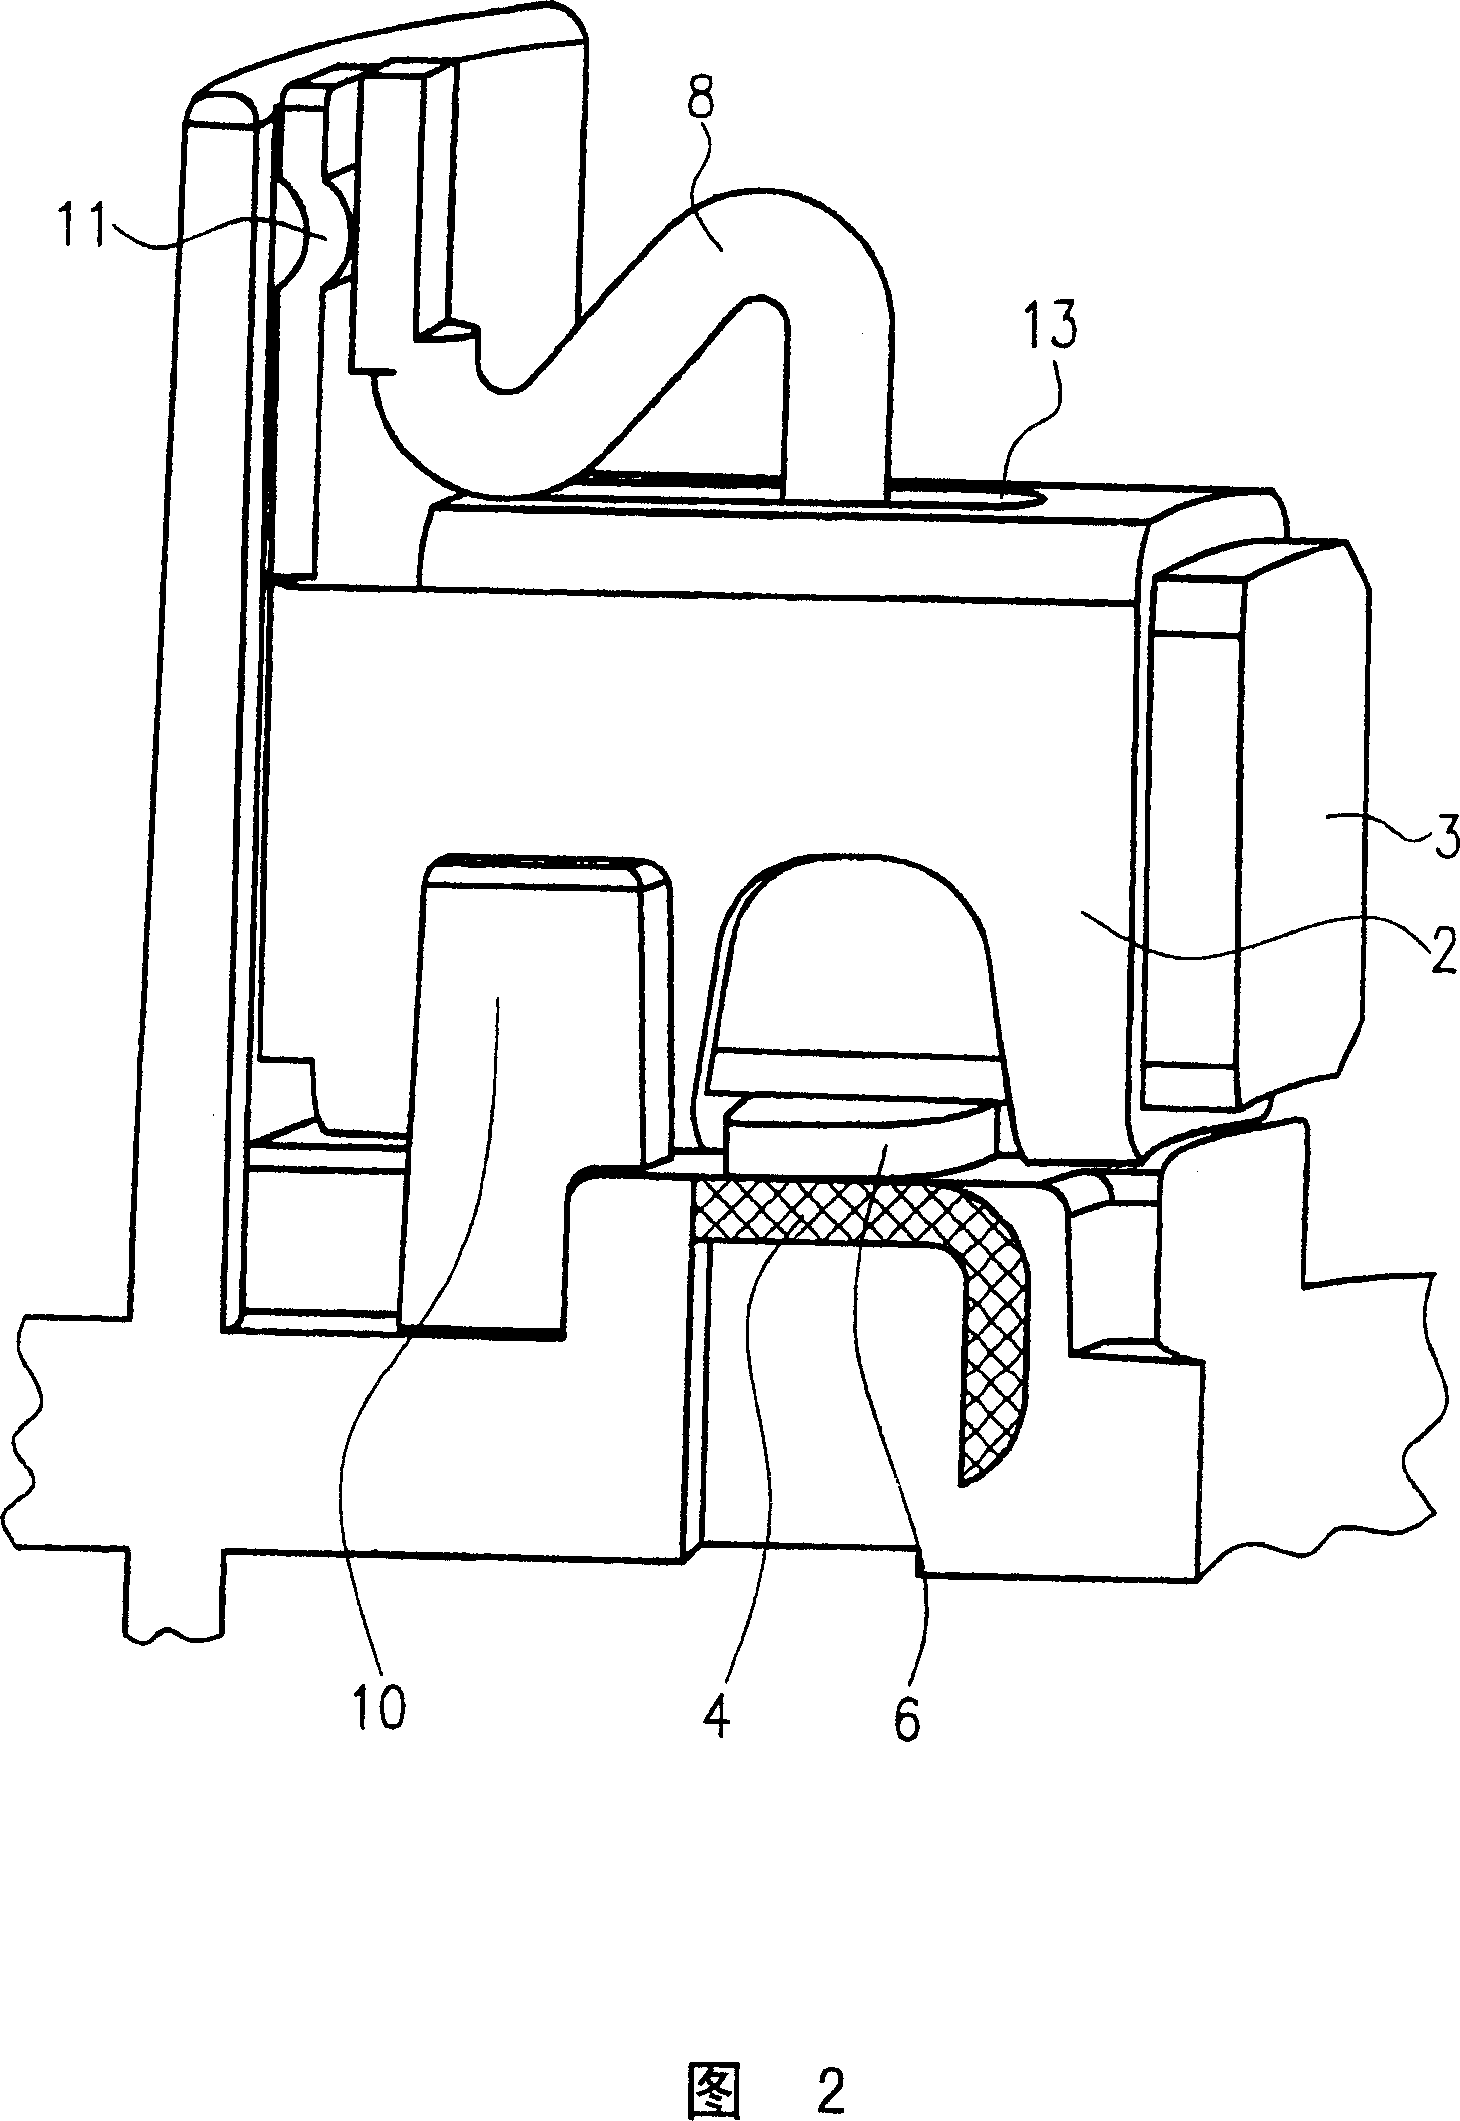 Electric machine with a brush carrier